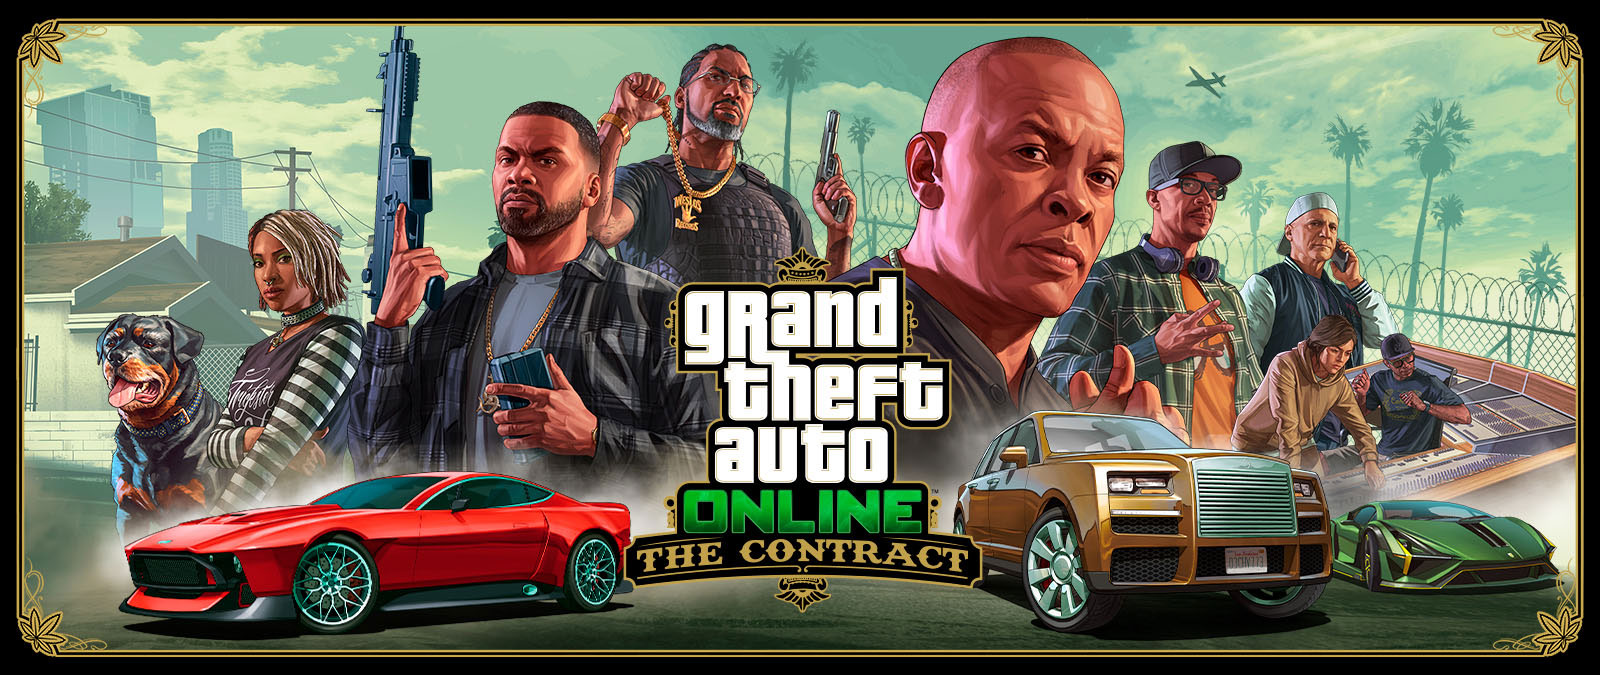 Grand Theft Auto Online, The Contract, Franklin, seven other friends and Chop the dog are lined up behind three exotic cars. 